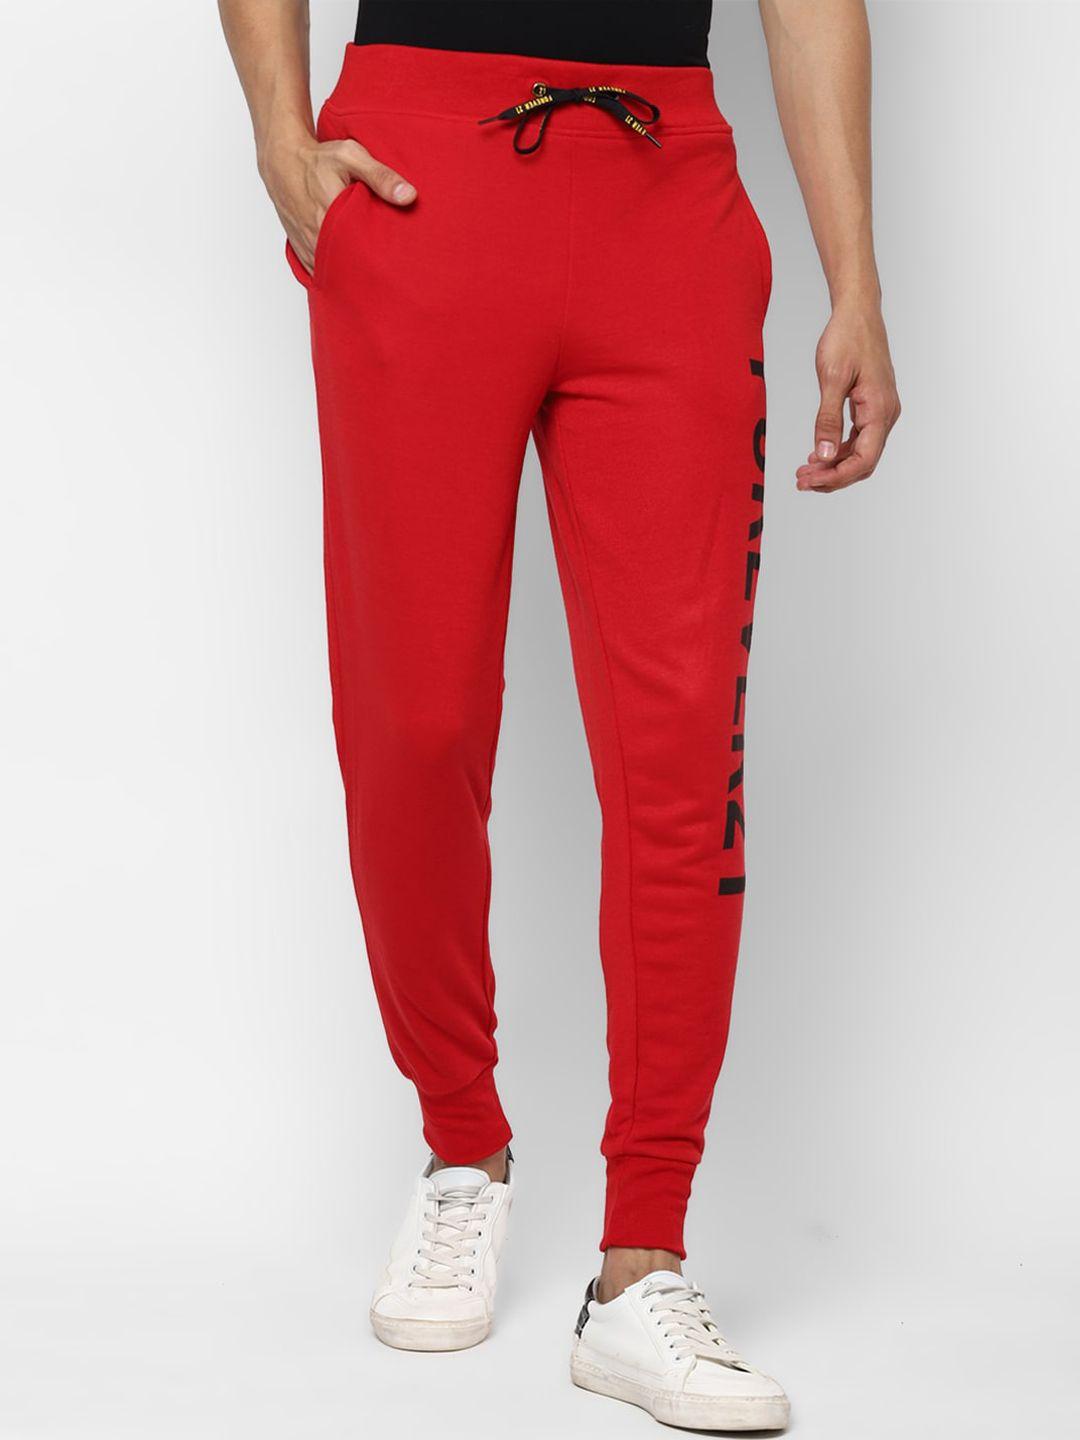 forever-21-men-red-&-black-typography-printed-joggers